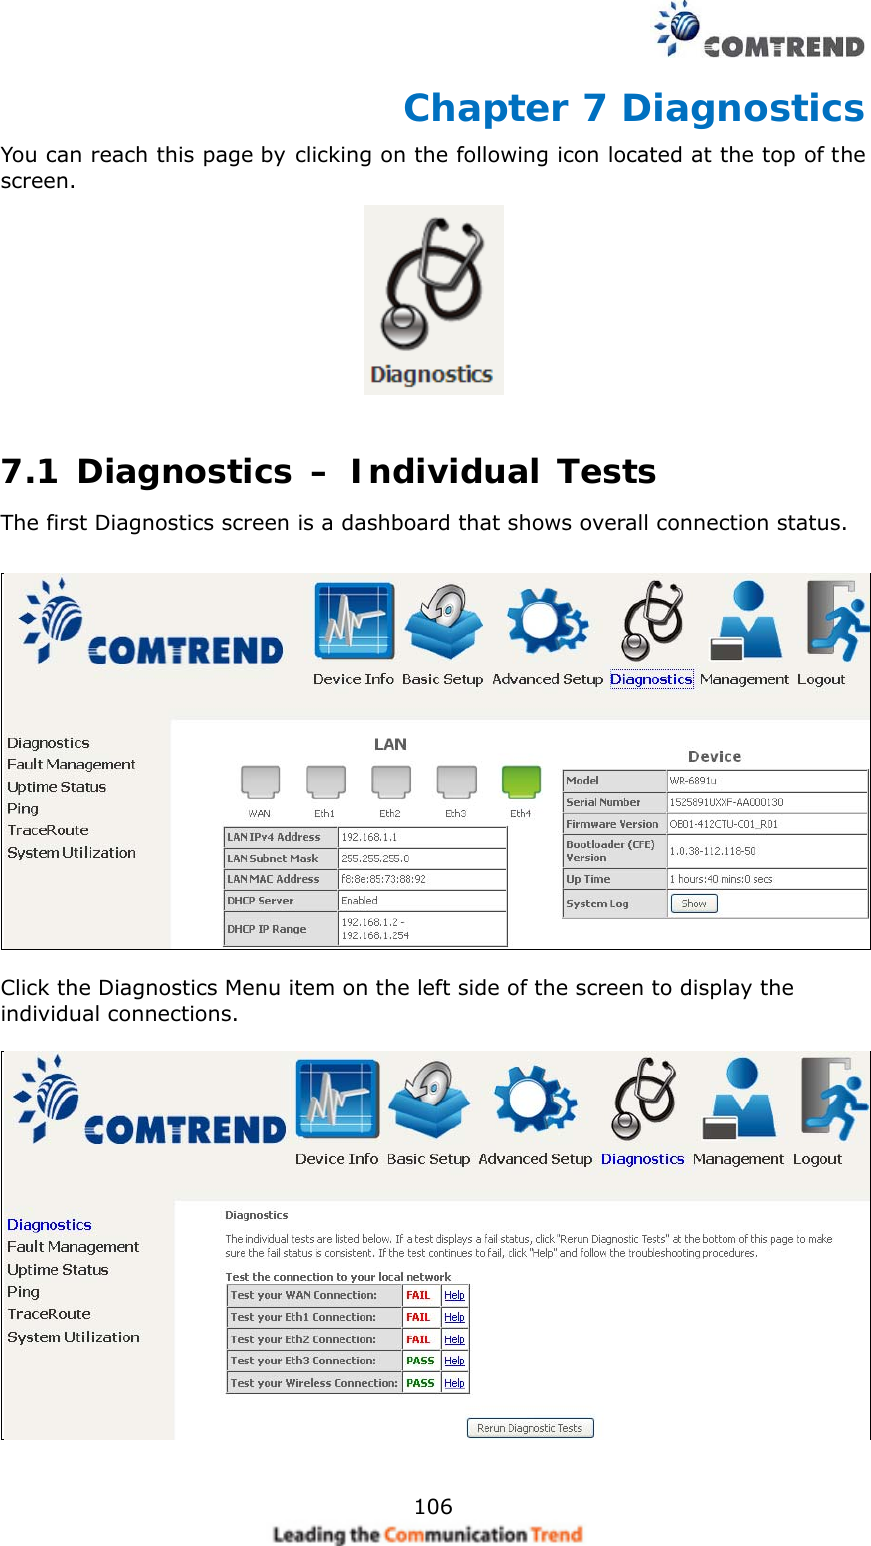    106Chapter 7 Diagnostics You can reach this page by clicking on the following icon located at the top of the screen.  7.1 Diagnostics – Individual Tests The first Diagnostics screen is a dashboard that shows overall connection status.      Click the Diagnostics Menu item on the left side of the screen to display the individual connections.     